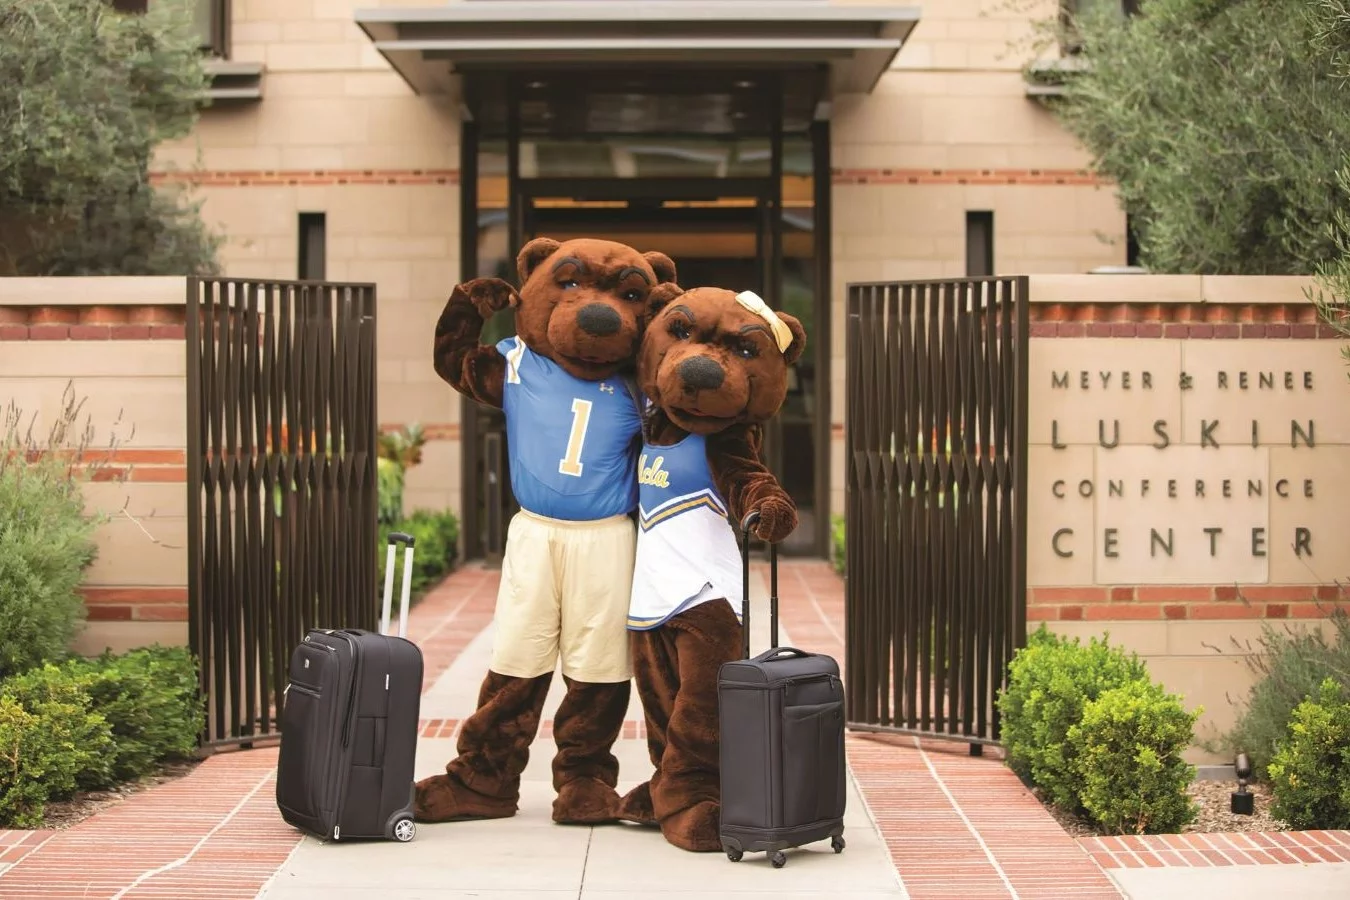 Joe and Josie Bruin posed in front of the Luskin Conference Center